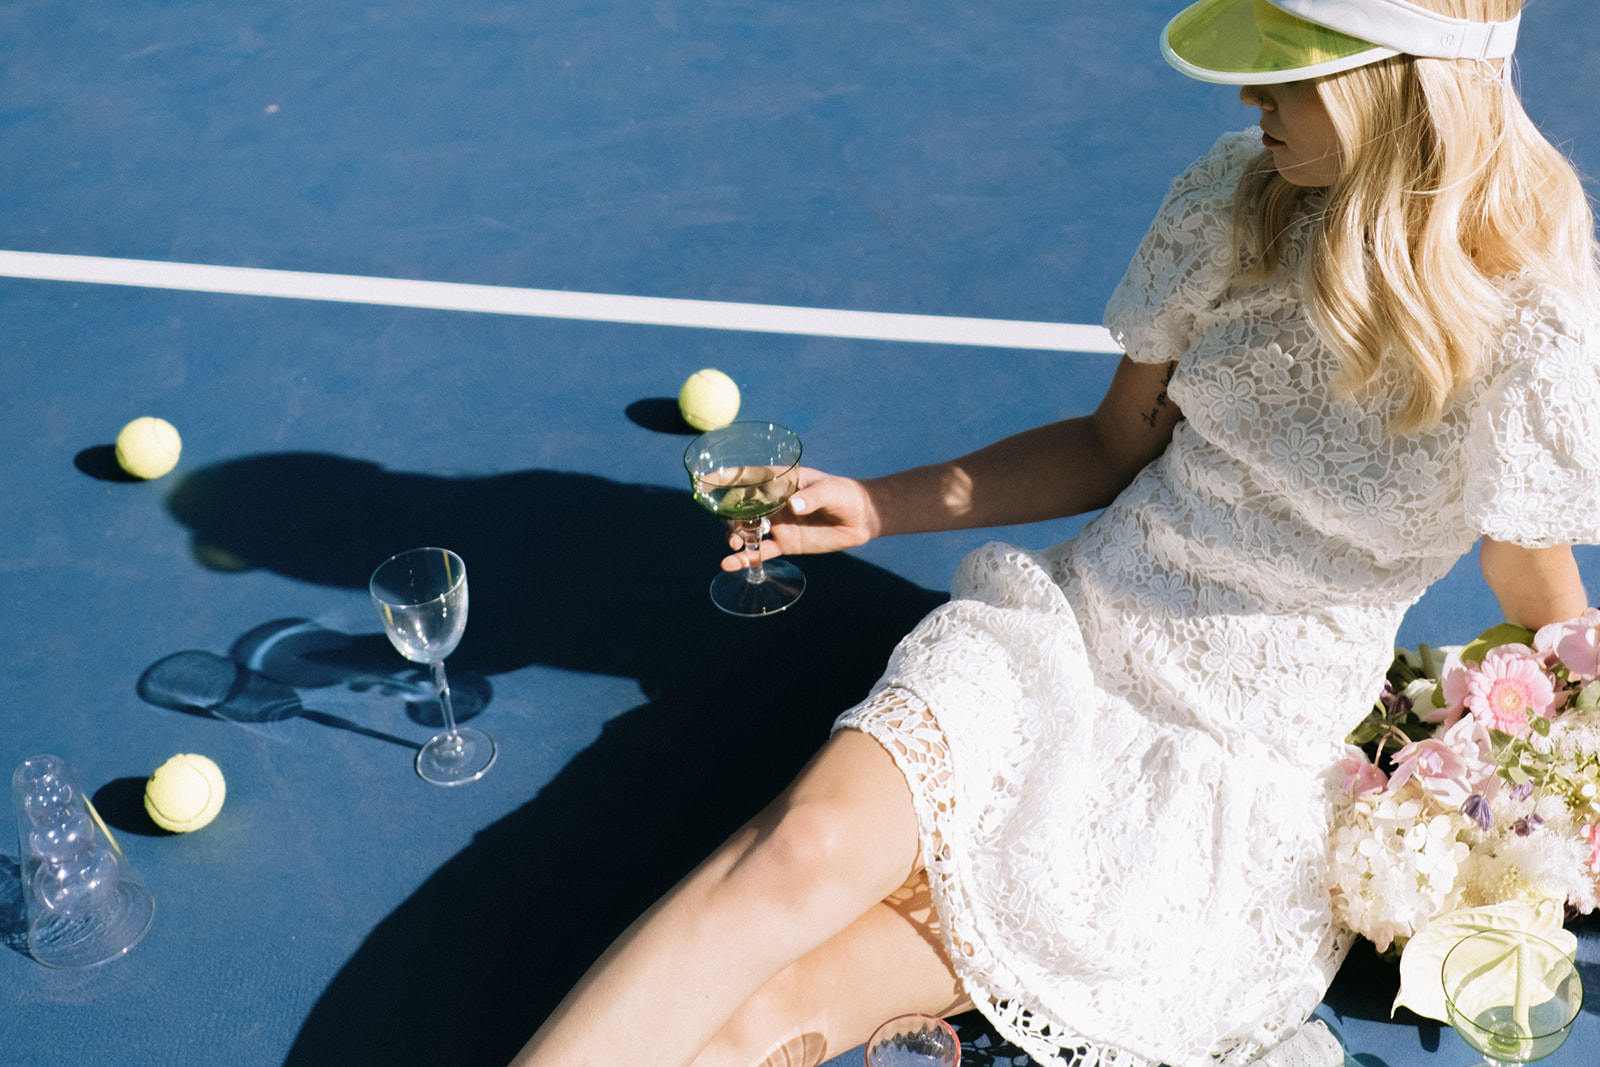 Bride enjoying a casual and laid-back cocktail during elopement, fashion-forward bridal style featuring short white lace wedding dress and tennis visor, pastel pink, white and chartreuse bridal bouquet